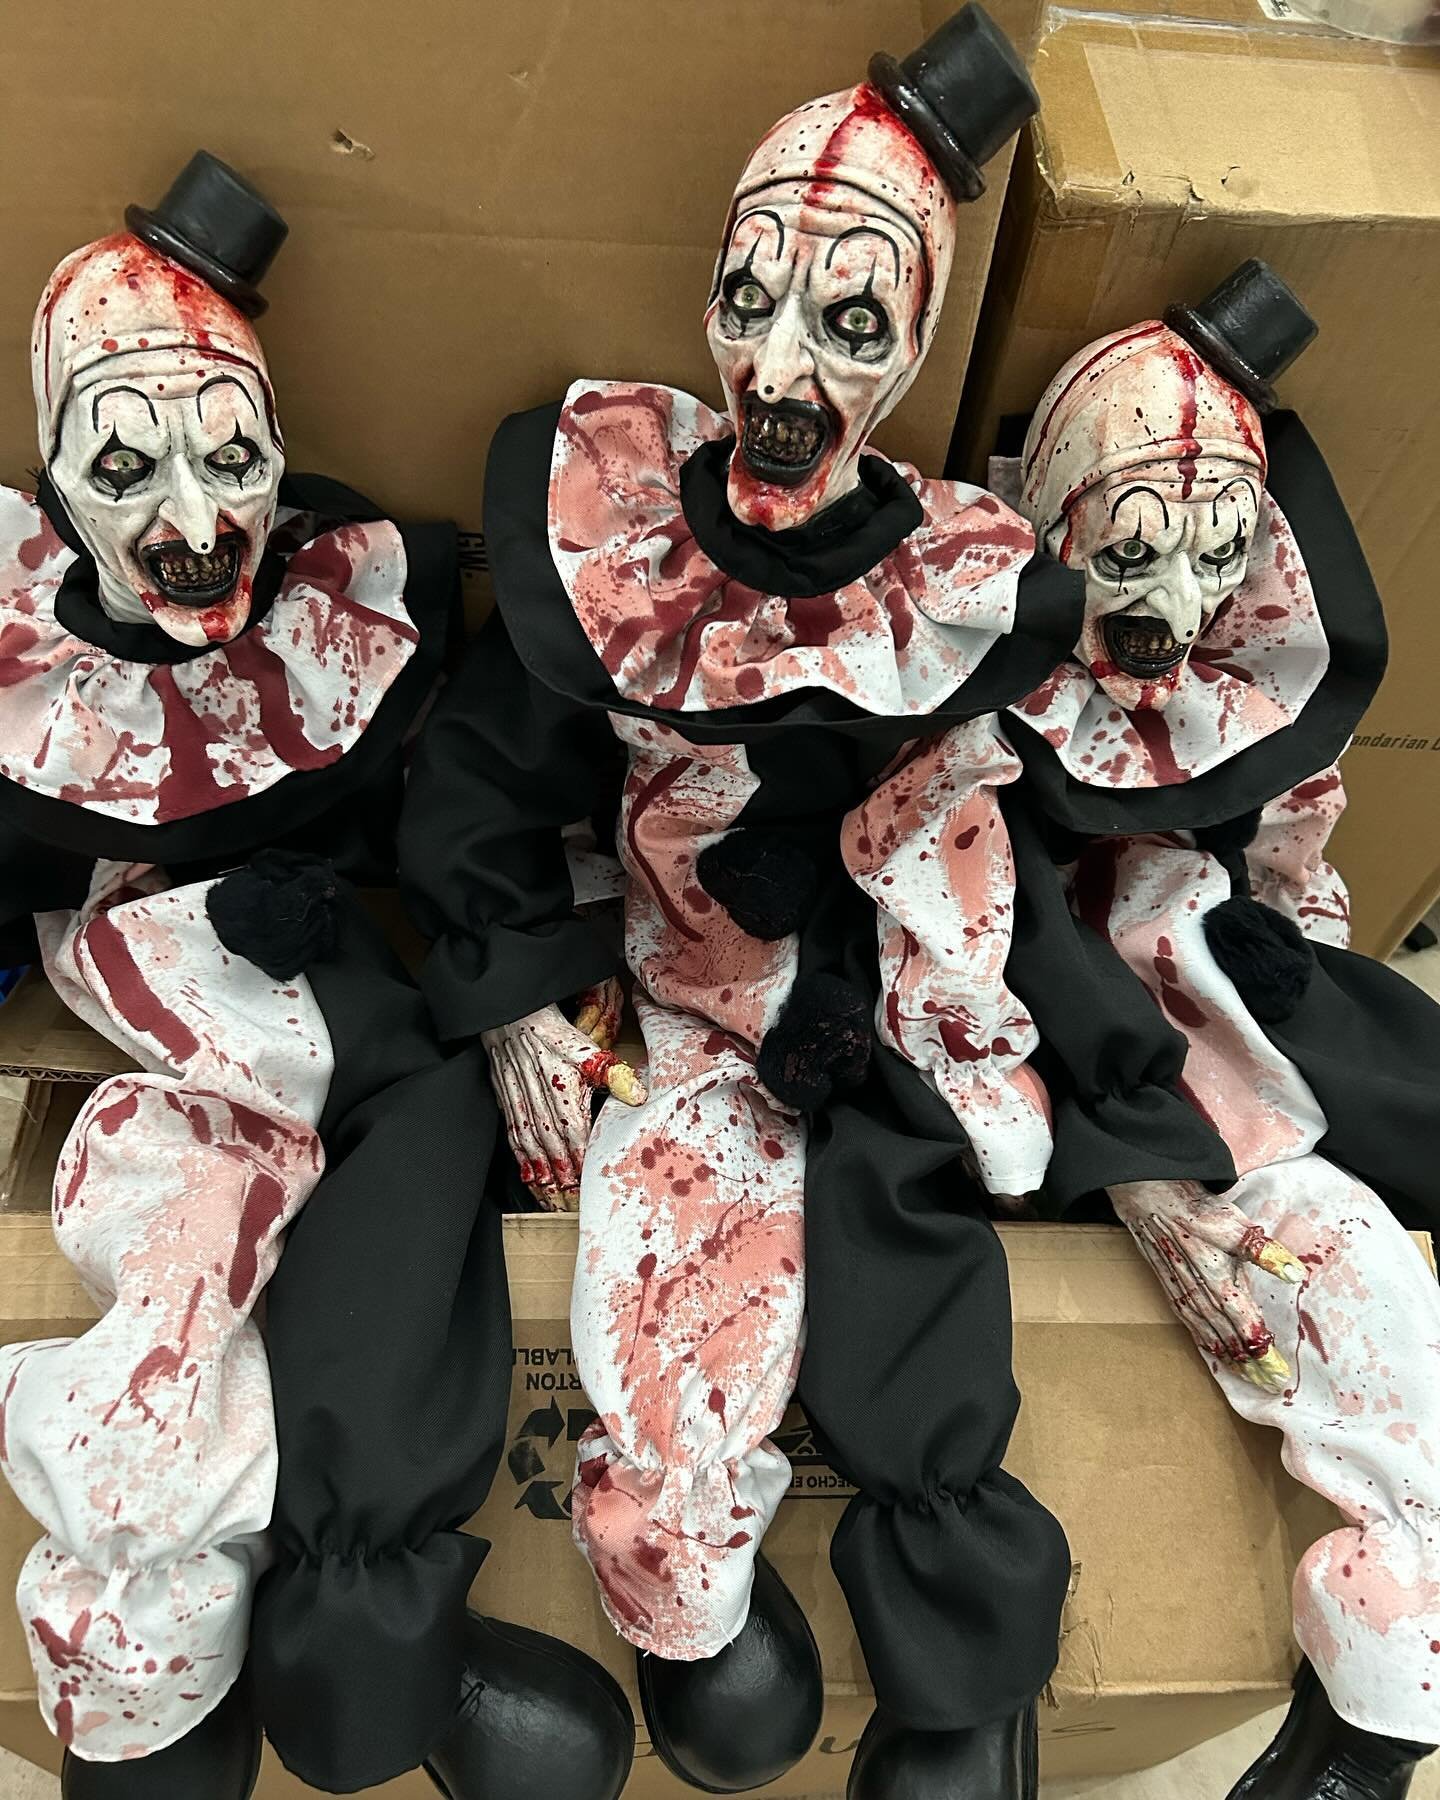 Packing these clowns for @texasfrightmareweekend come see us starting Friday. 

#halloween365 #halloween #horror #cosplay #trickortreat #halloweenmask #mask
#lordgrimleysmanor #lordgrimley.com 
#haunter #halloweendecor #halloween2024
#scary 
#artthec